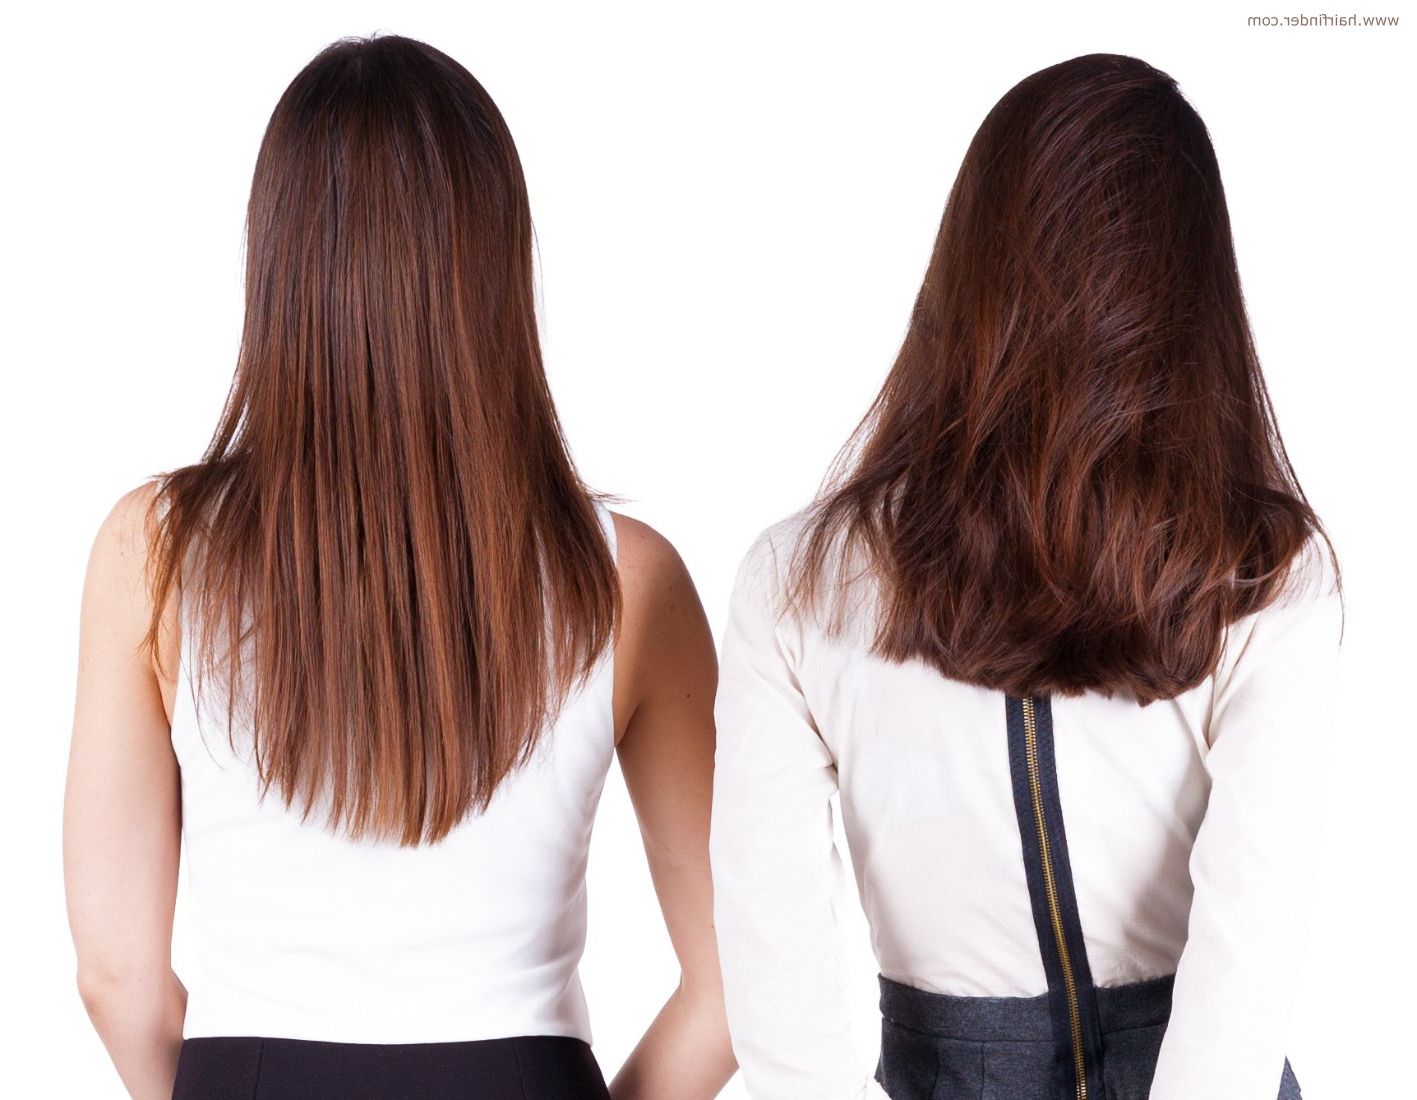 Fashionable V Shaped Layered Medium Haircuts For Cut The Back Of Long Hair In A U Shape, V Shape Or A Straight Line (View 11 of 20)